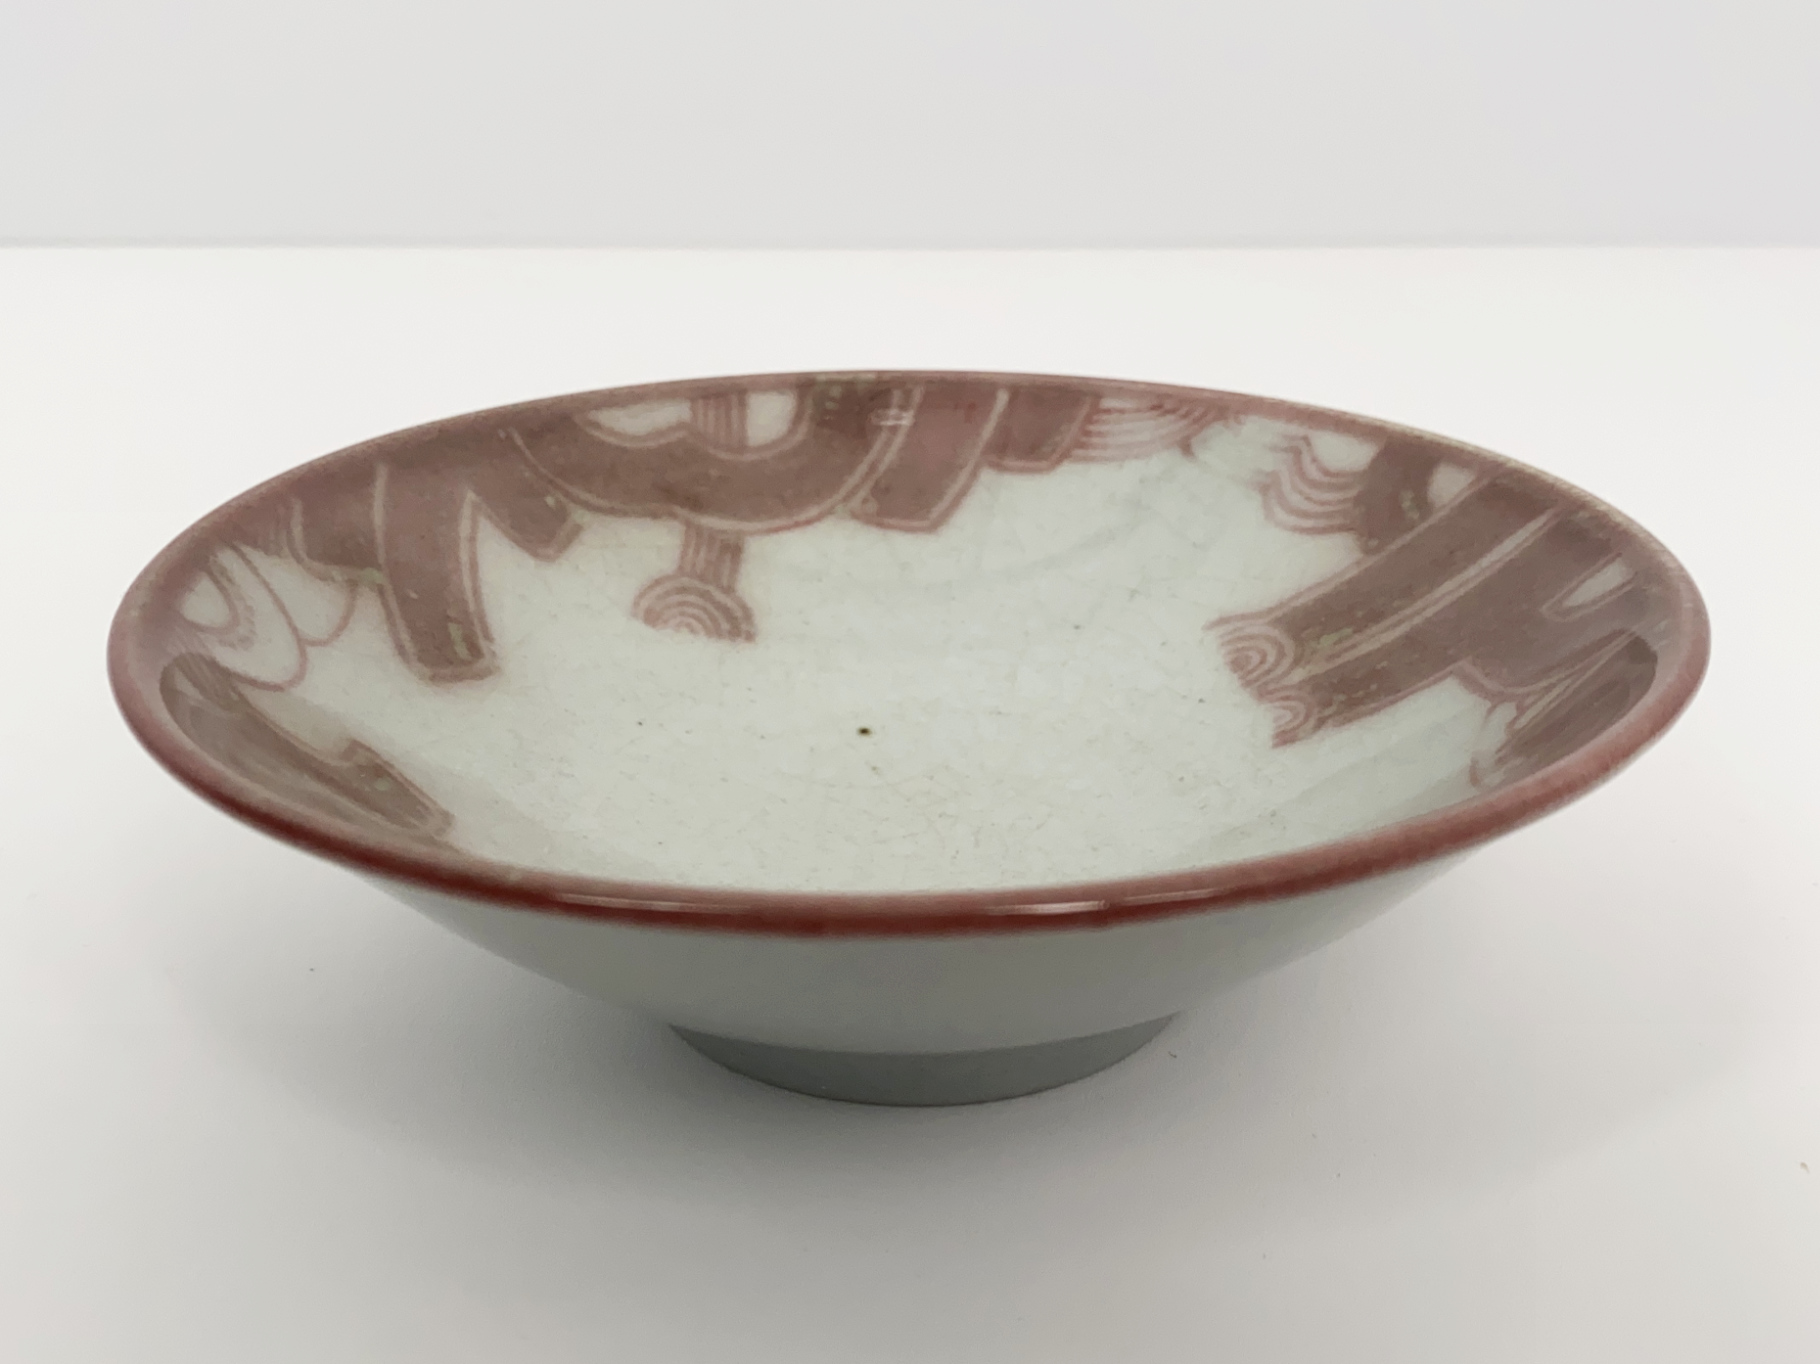 Porcelain Bowl, abstract craquelure Decor, painted with Copper, Lime Glaze, ca 2000